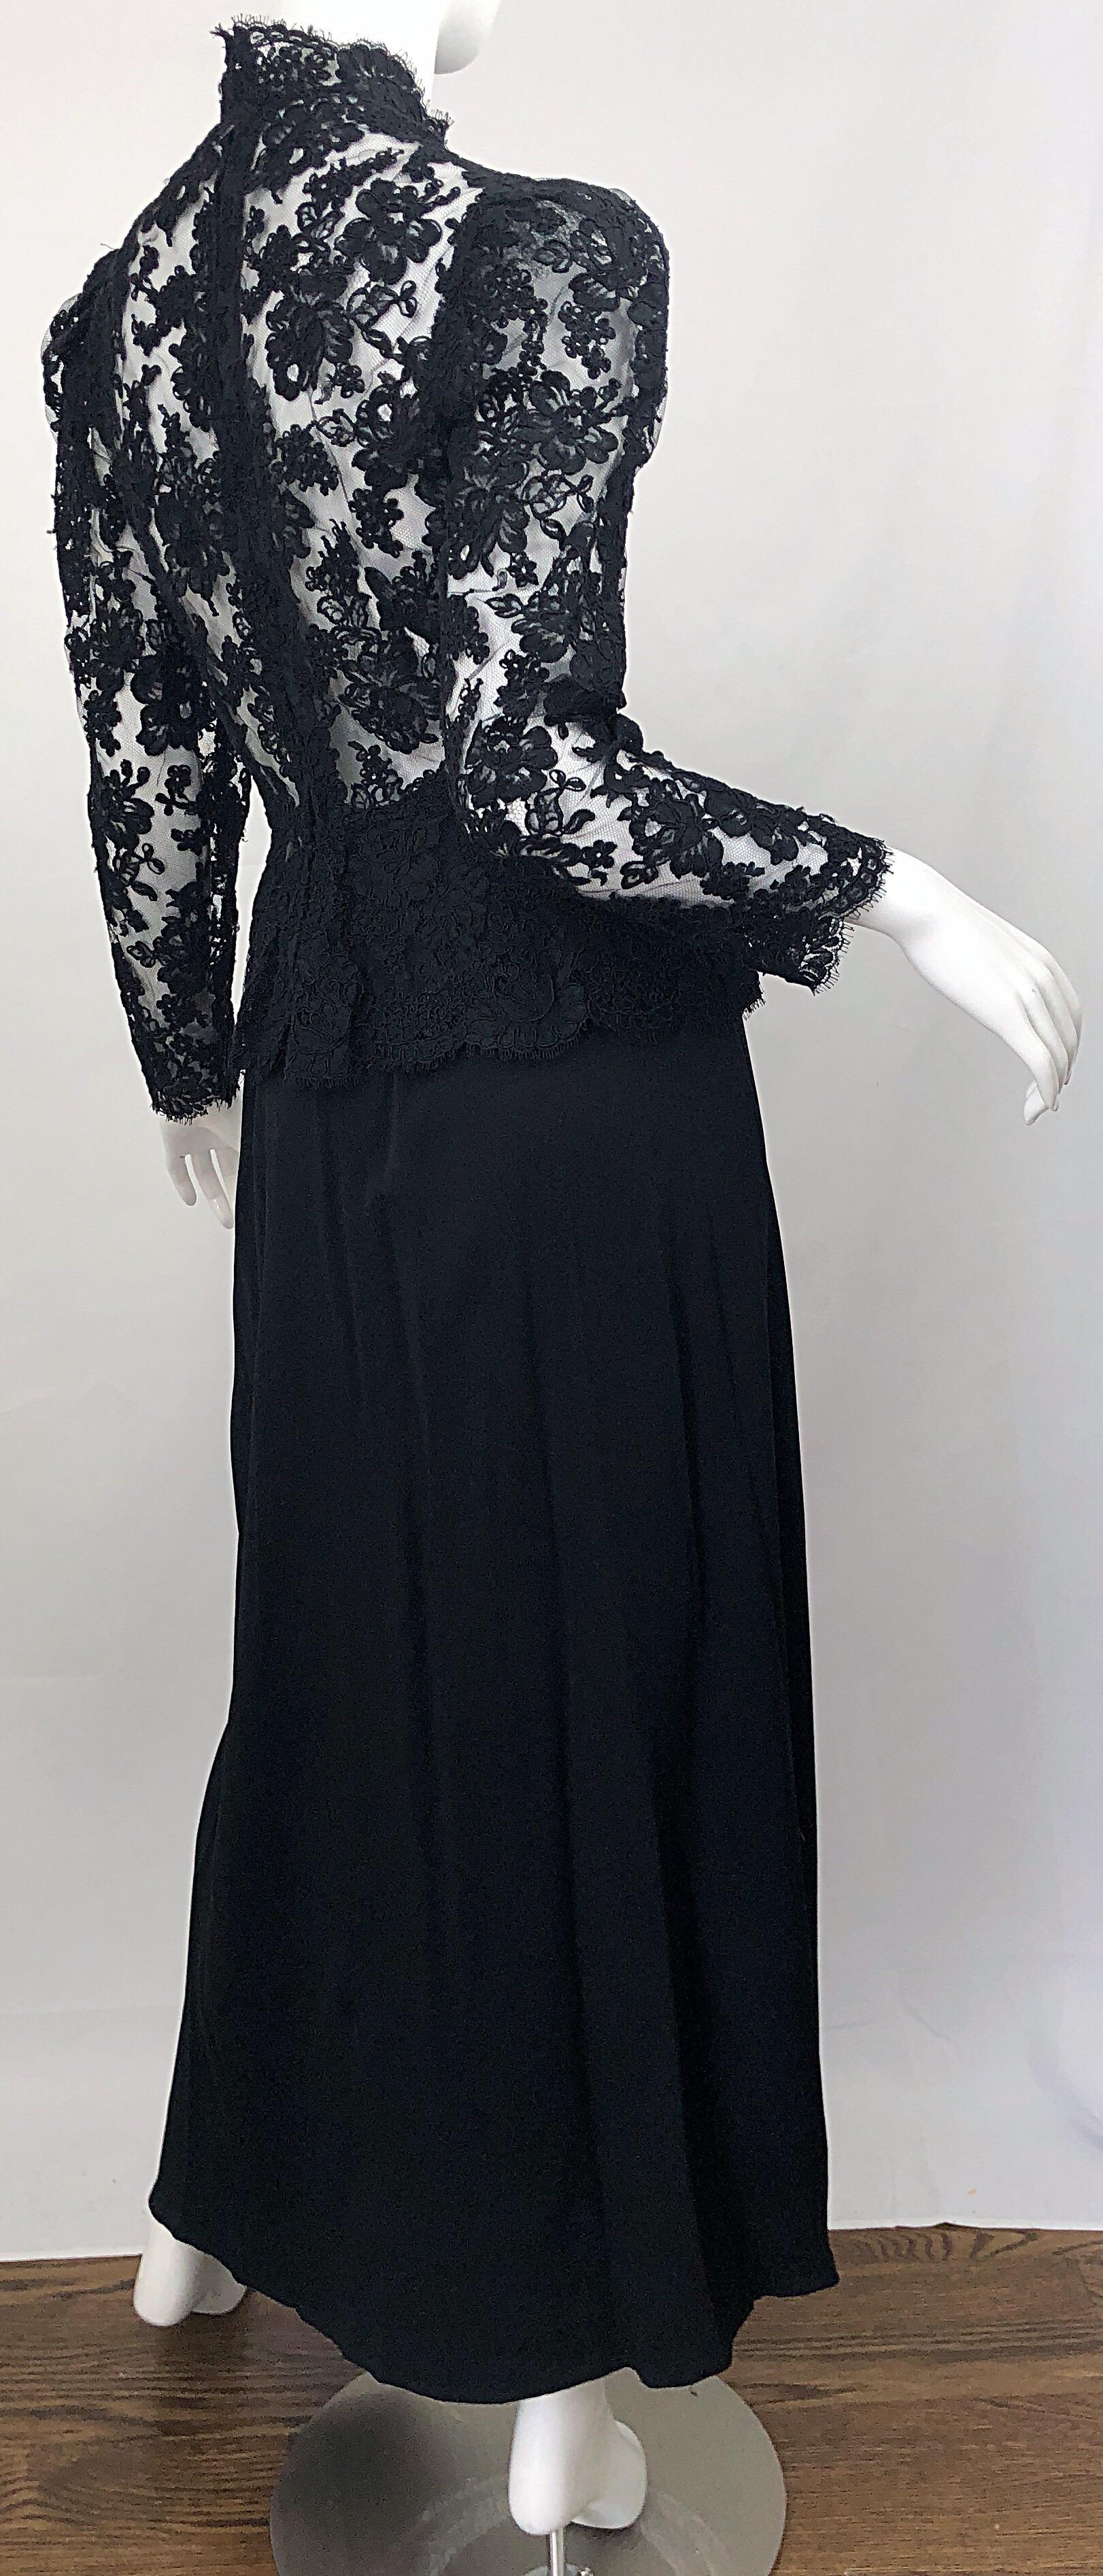 Vintage Vicky Tiel Couture 1980s Black Lace Victorian Top + Asymmetrical Skirt For Sale 3